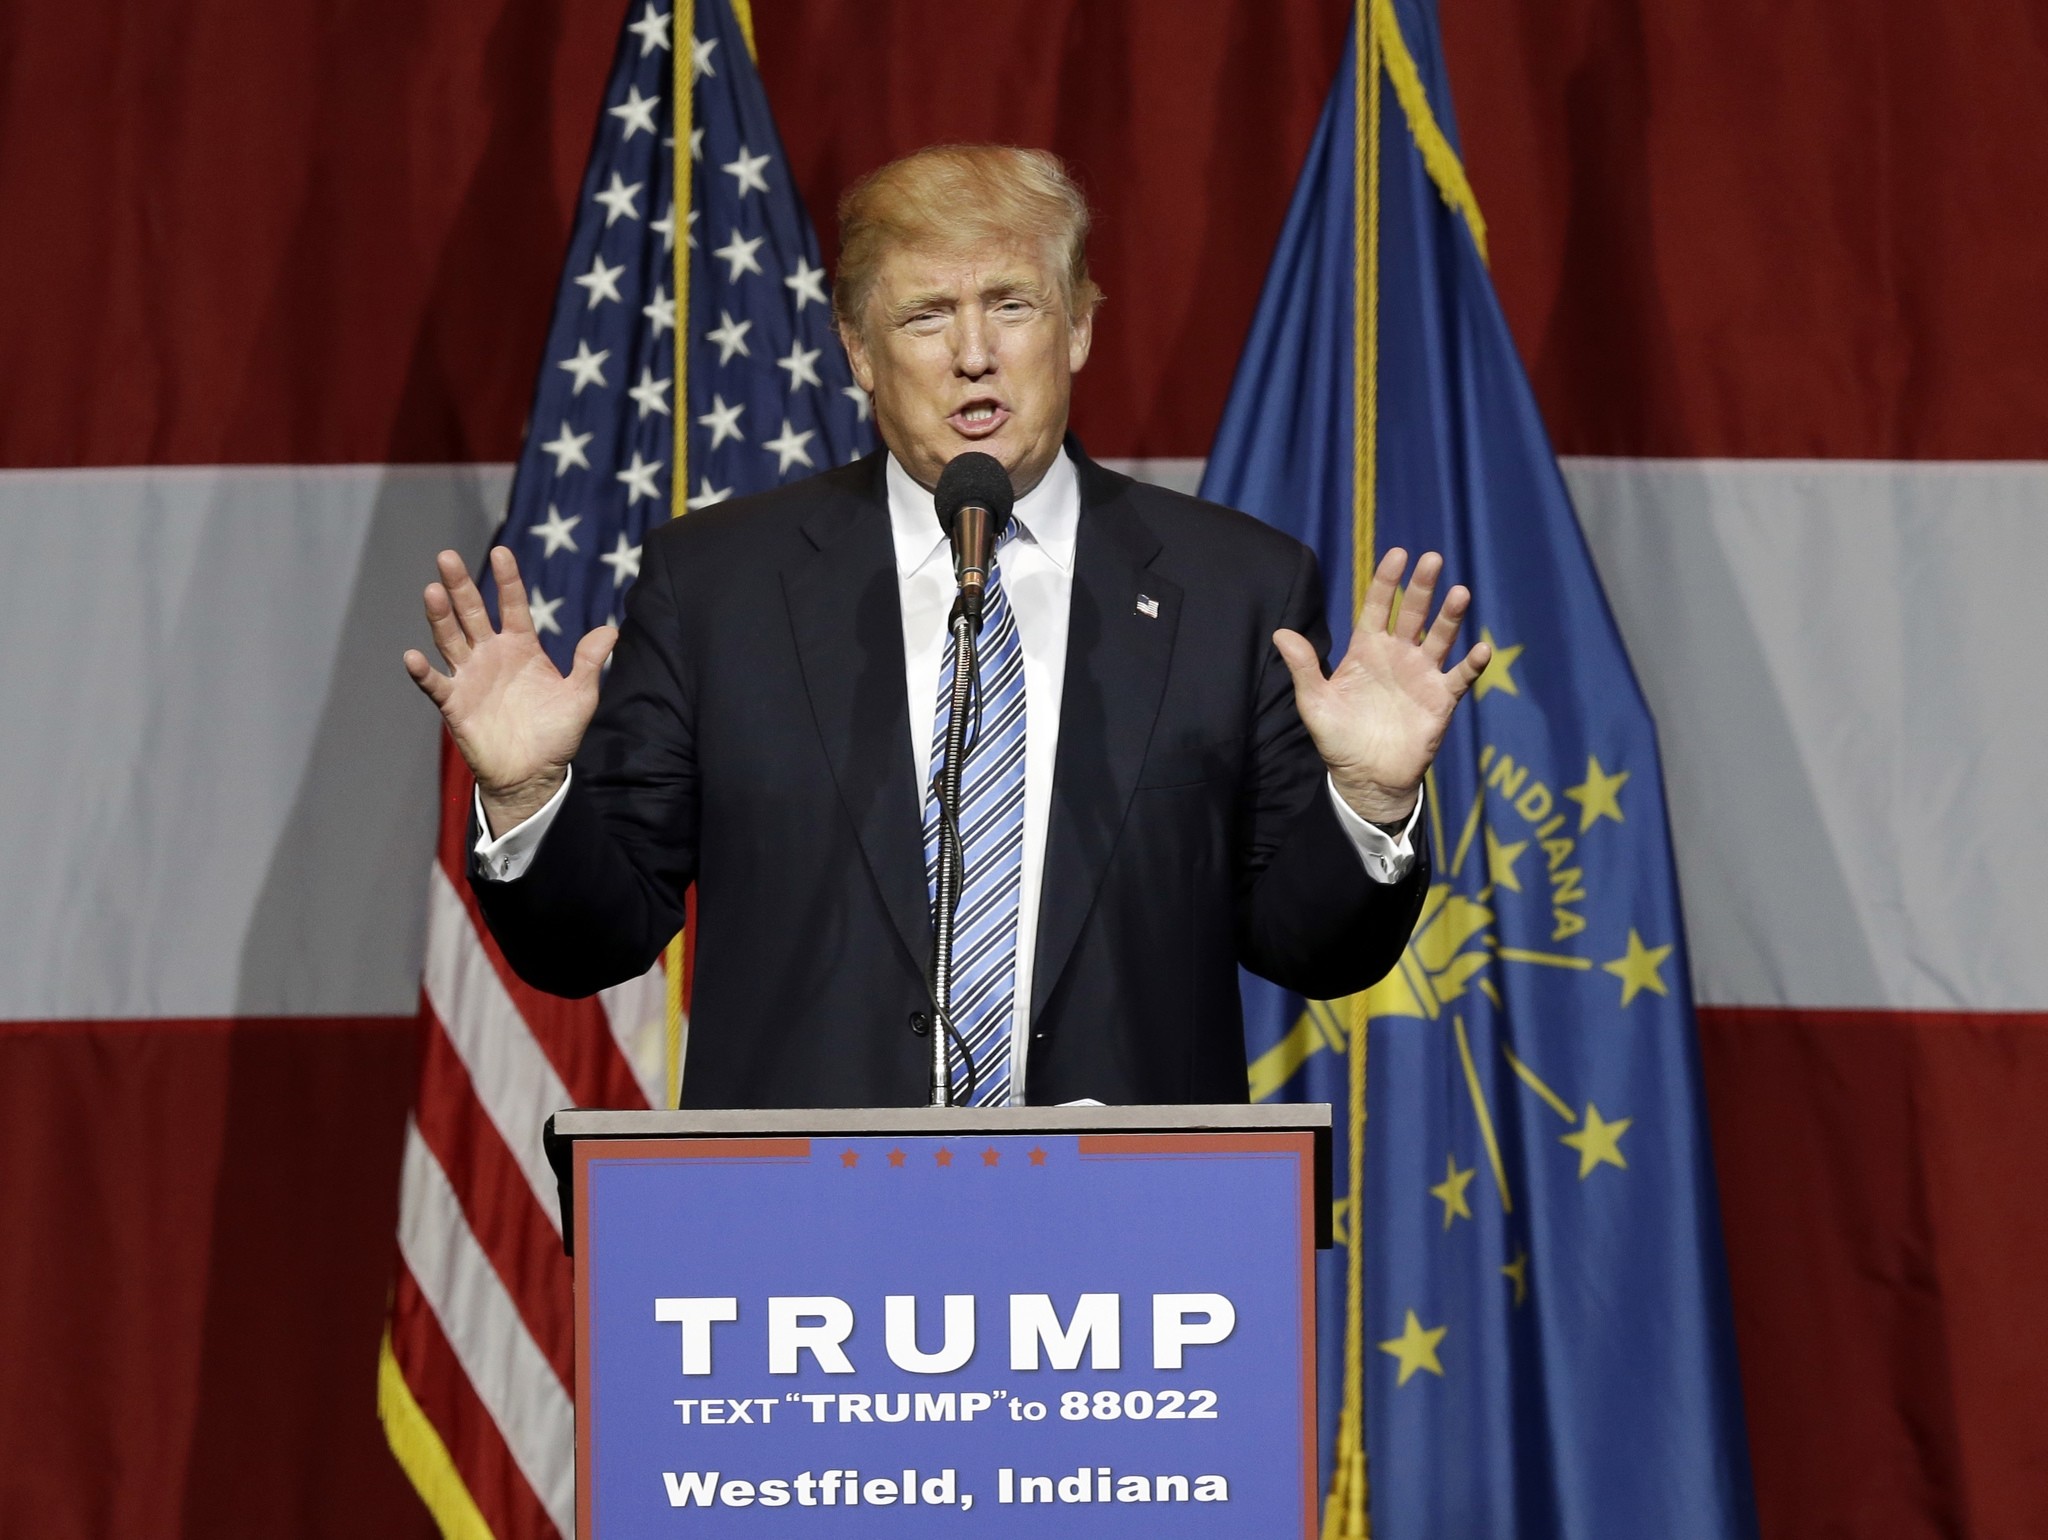 In this July 12, 2016 file photo, Republican presidential candidate Donald Trump speaks in Westfield, Ind. (AP Photo)